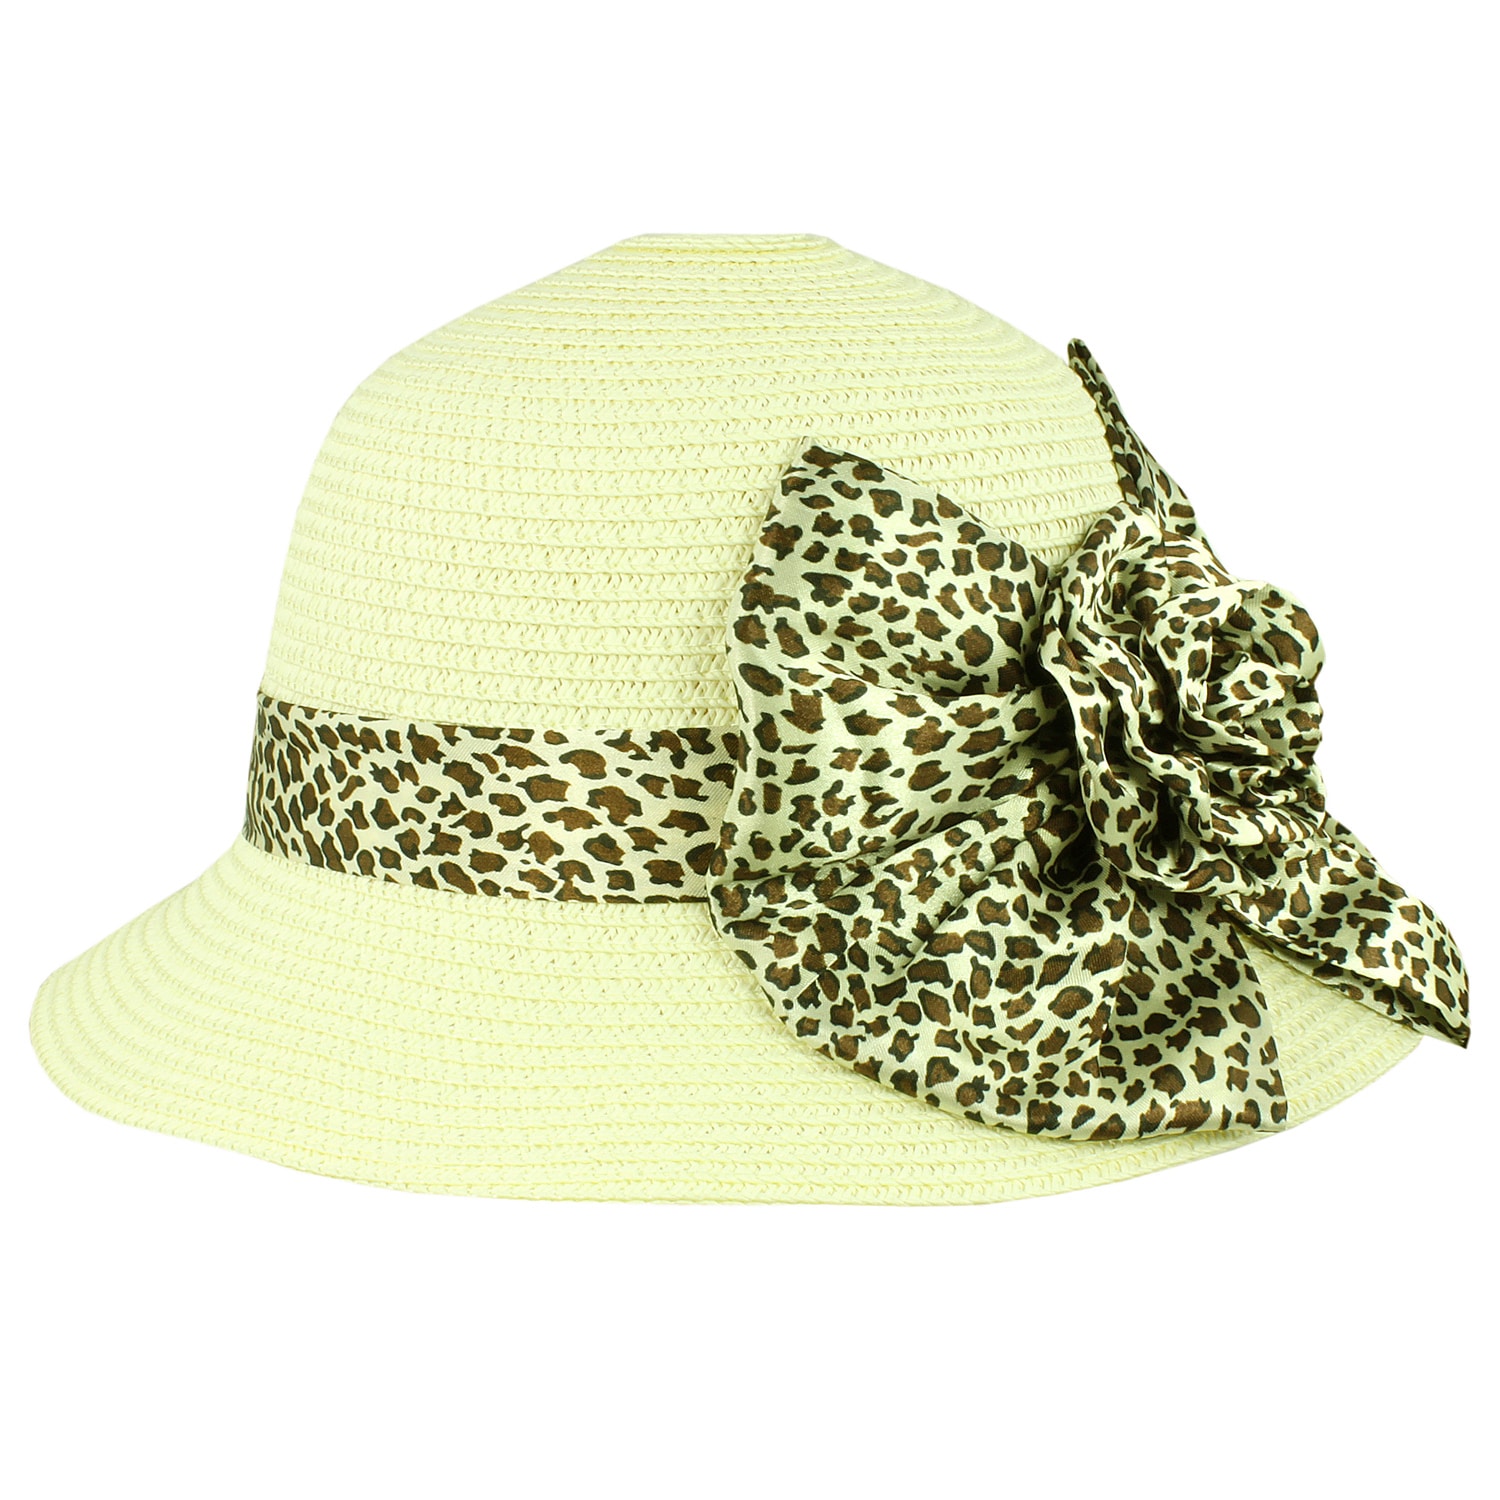 Faddism Womens Summer Ribbon Straw Hat (one Size) (100 percent paperOne size fits mostStyle Summer)